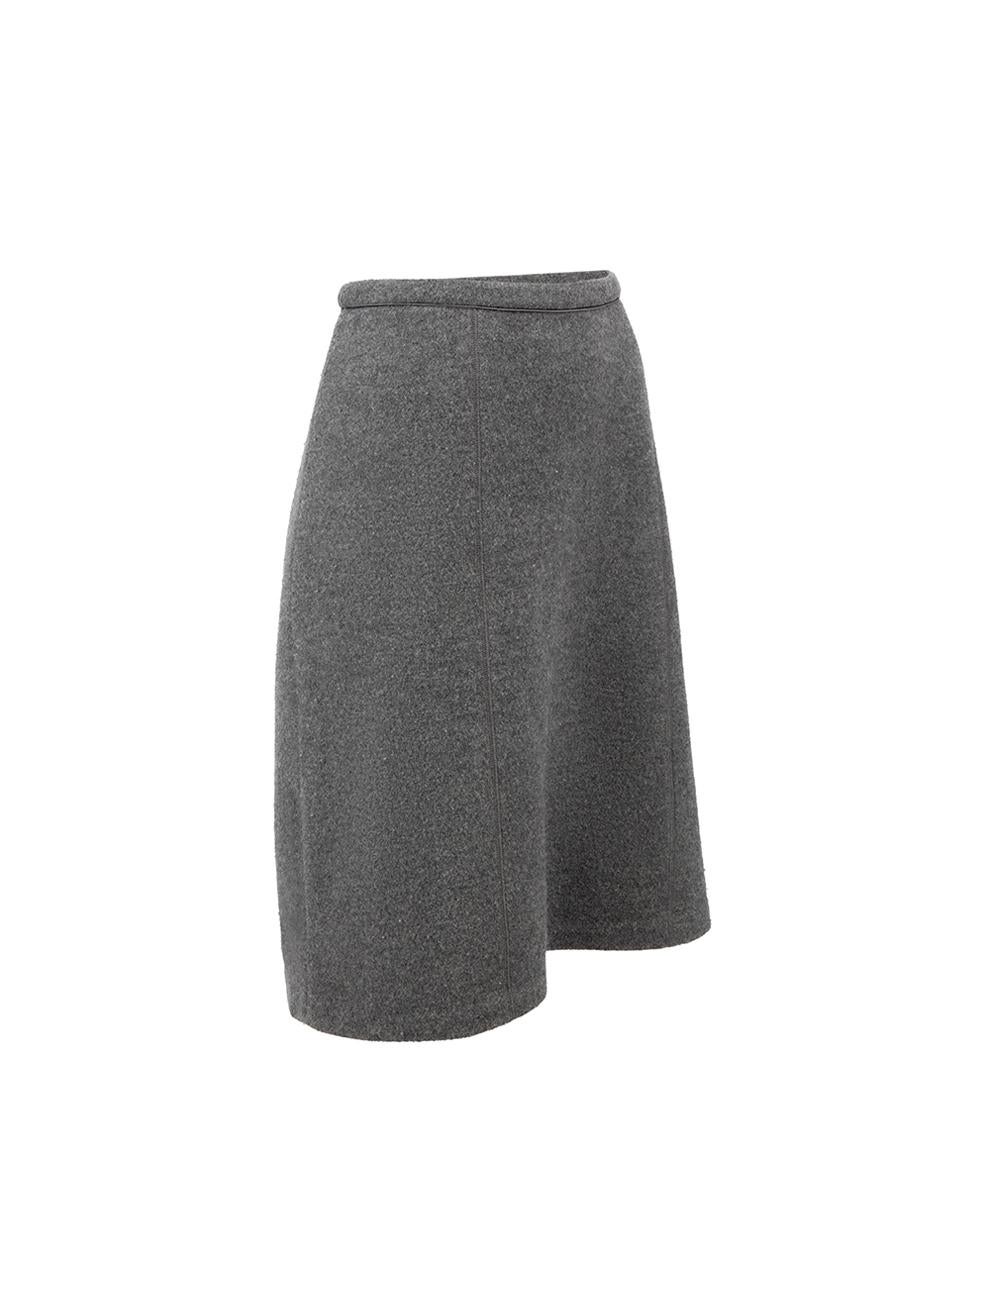 CONDITION is Very good. Minimal wear to skirt is evident. Minimal wear to the overall texture with slight pilling on this used Weekend Max Mara designer resale item.



Details


Grey

Wool

A line skirt

Mini length

Side zip closure with hook and